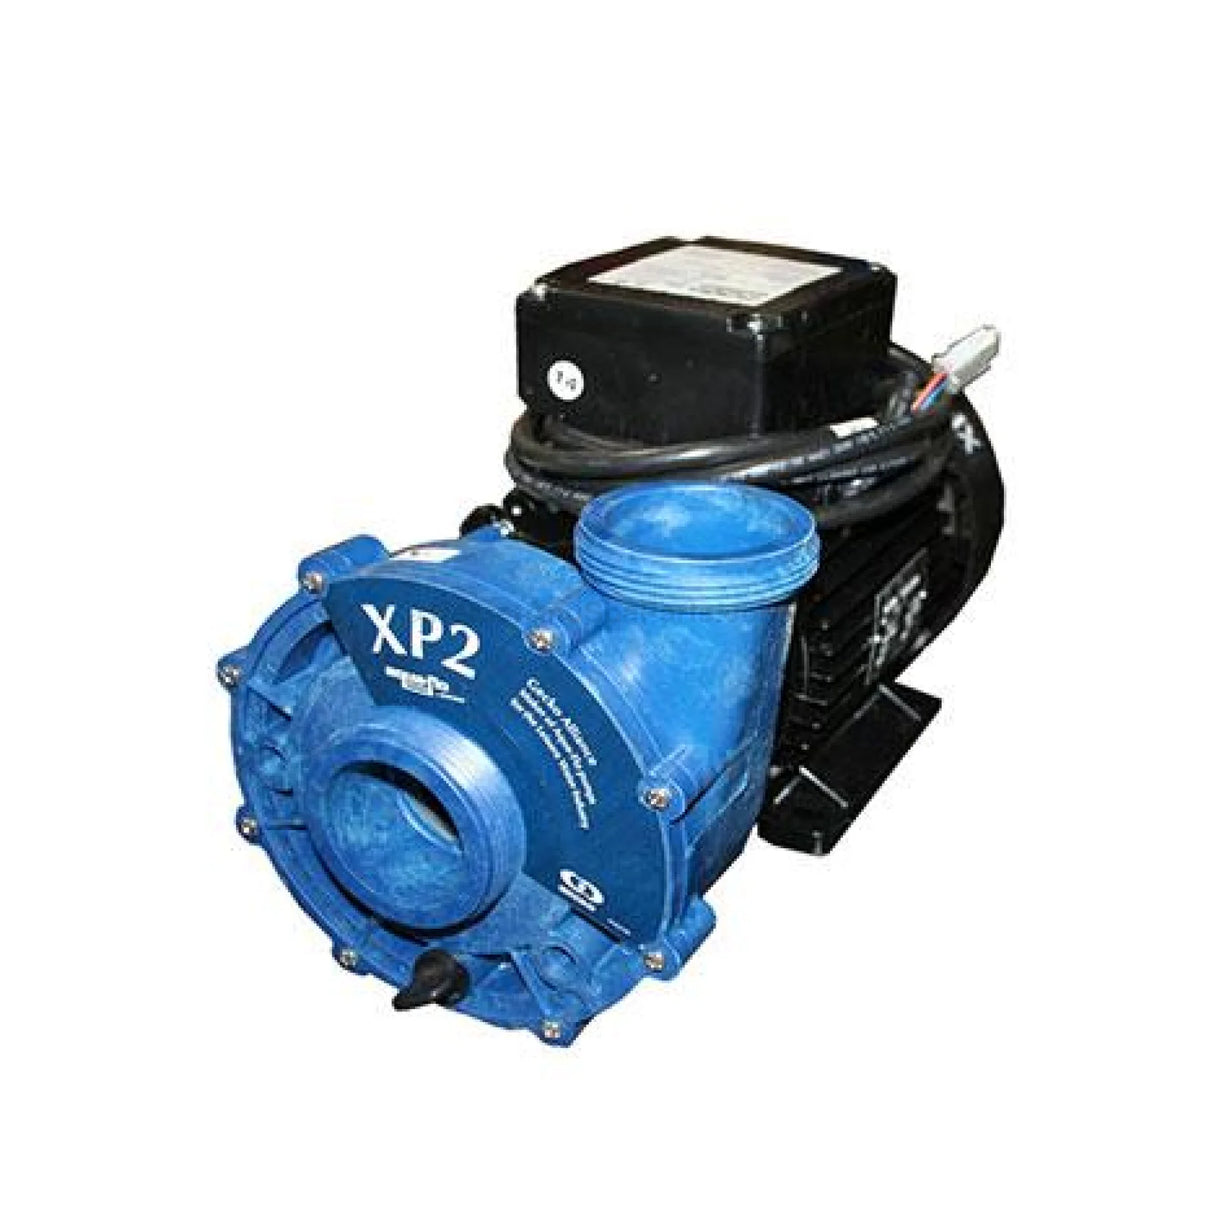 Aqua-Flo XP2 2.0HP - 1-Speed Flo-Master - Spa Jet Booster Pump - Heater and Spa Parts